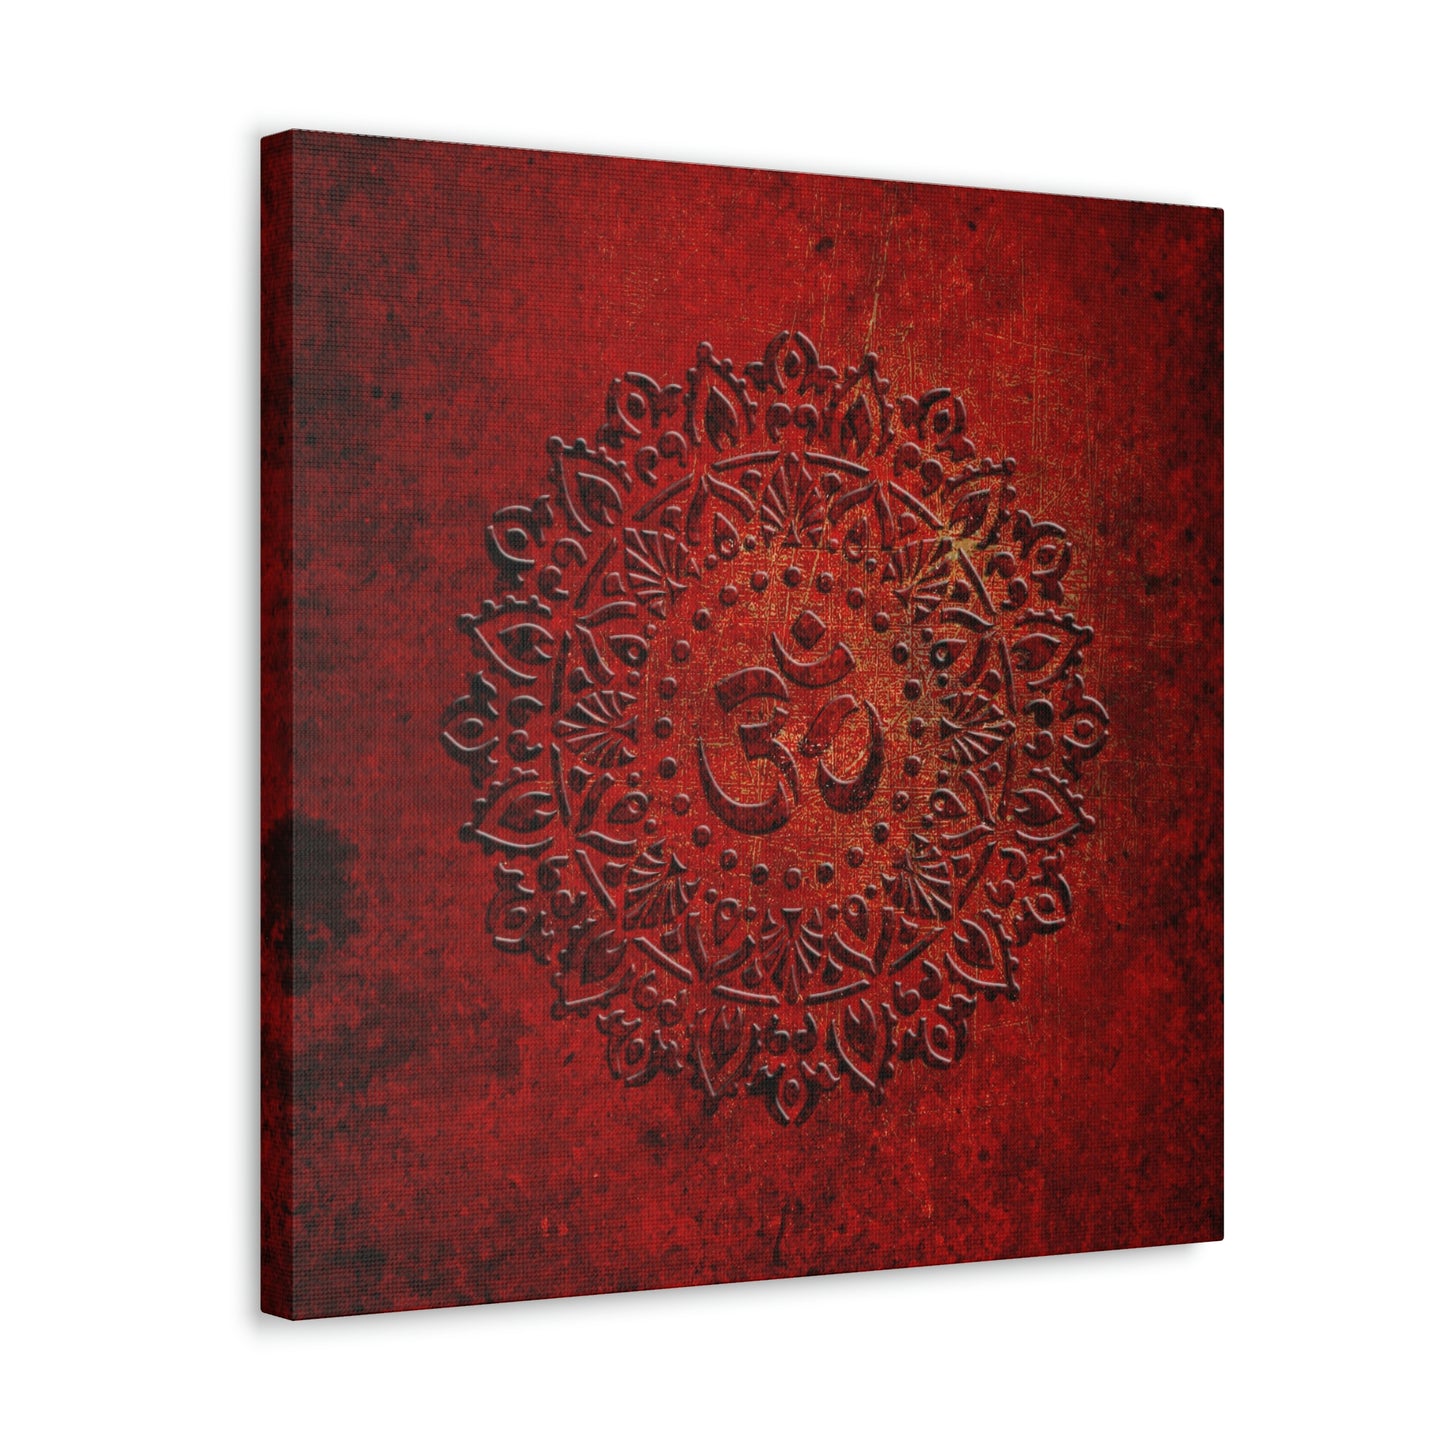 Om Symbol Mandala Style on Lava Red Background Printed on Unframed Stretched Canvas side view